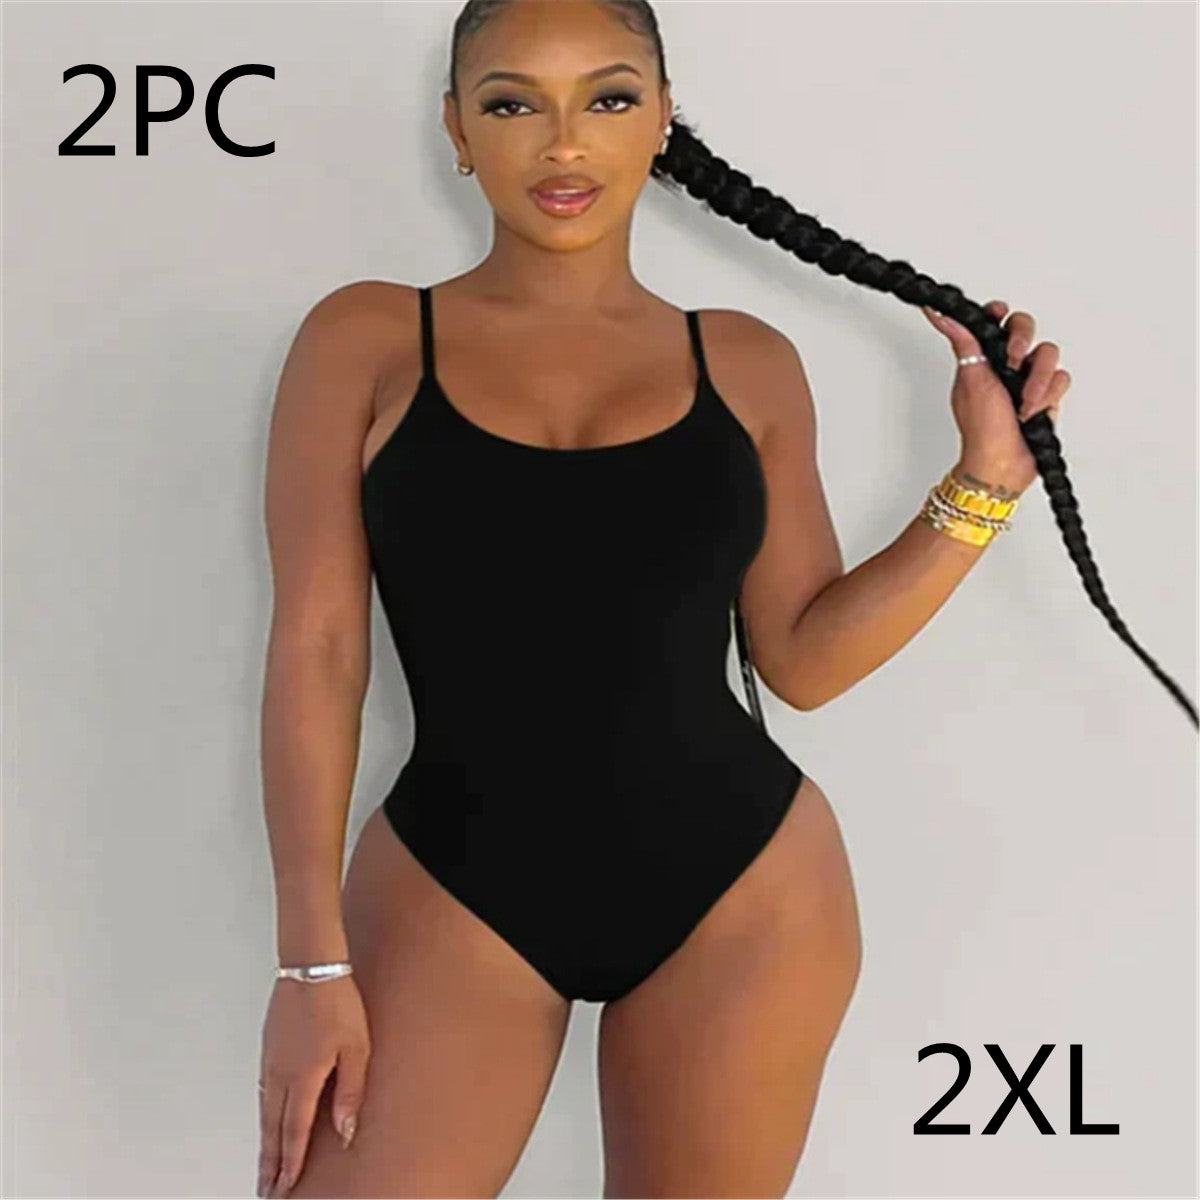 Swimsuit  | Sling Backless Plus Size Solid Color Triangle One-piece Swimsuit | Black Round Neck 2PC |  2XL| thecurvestory.myshopify.com